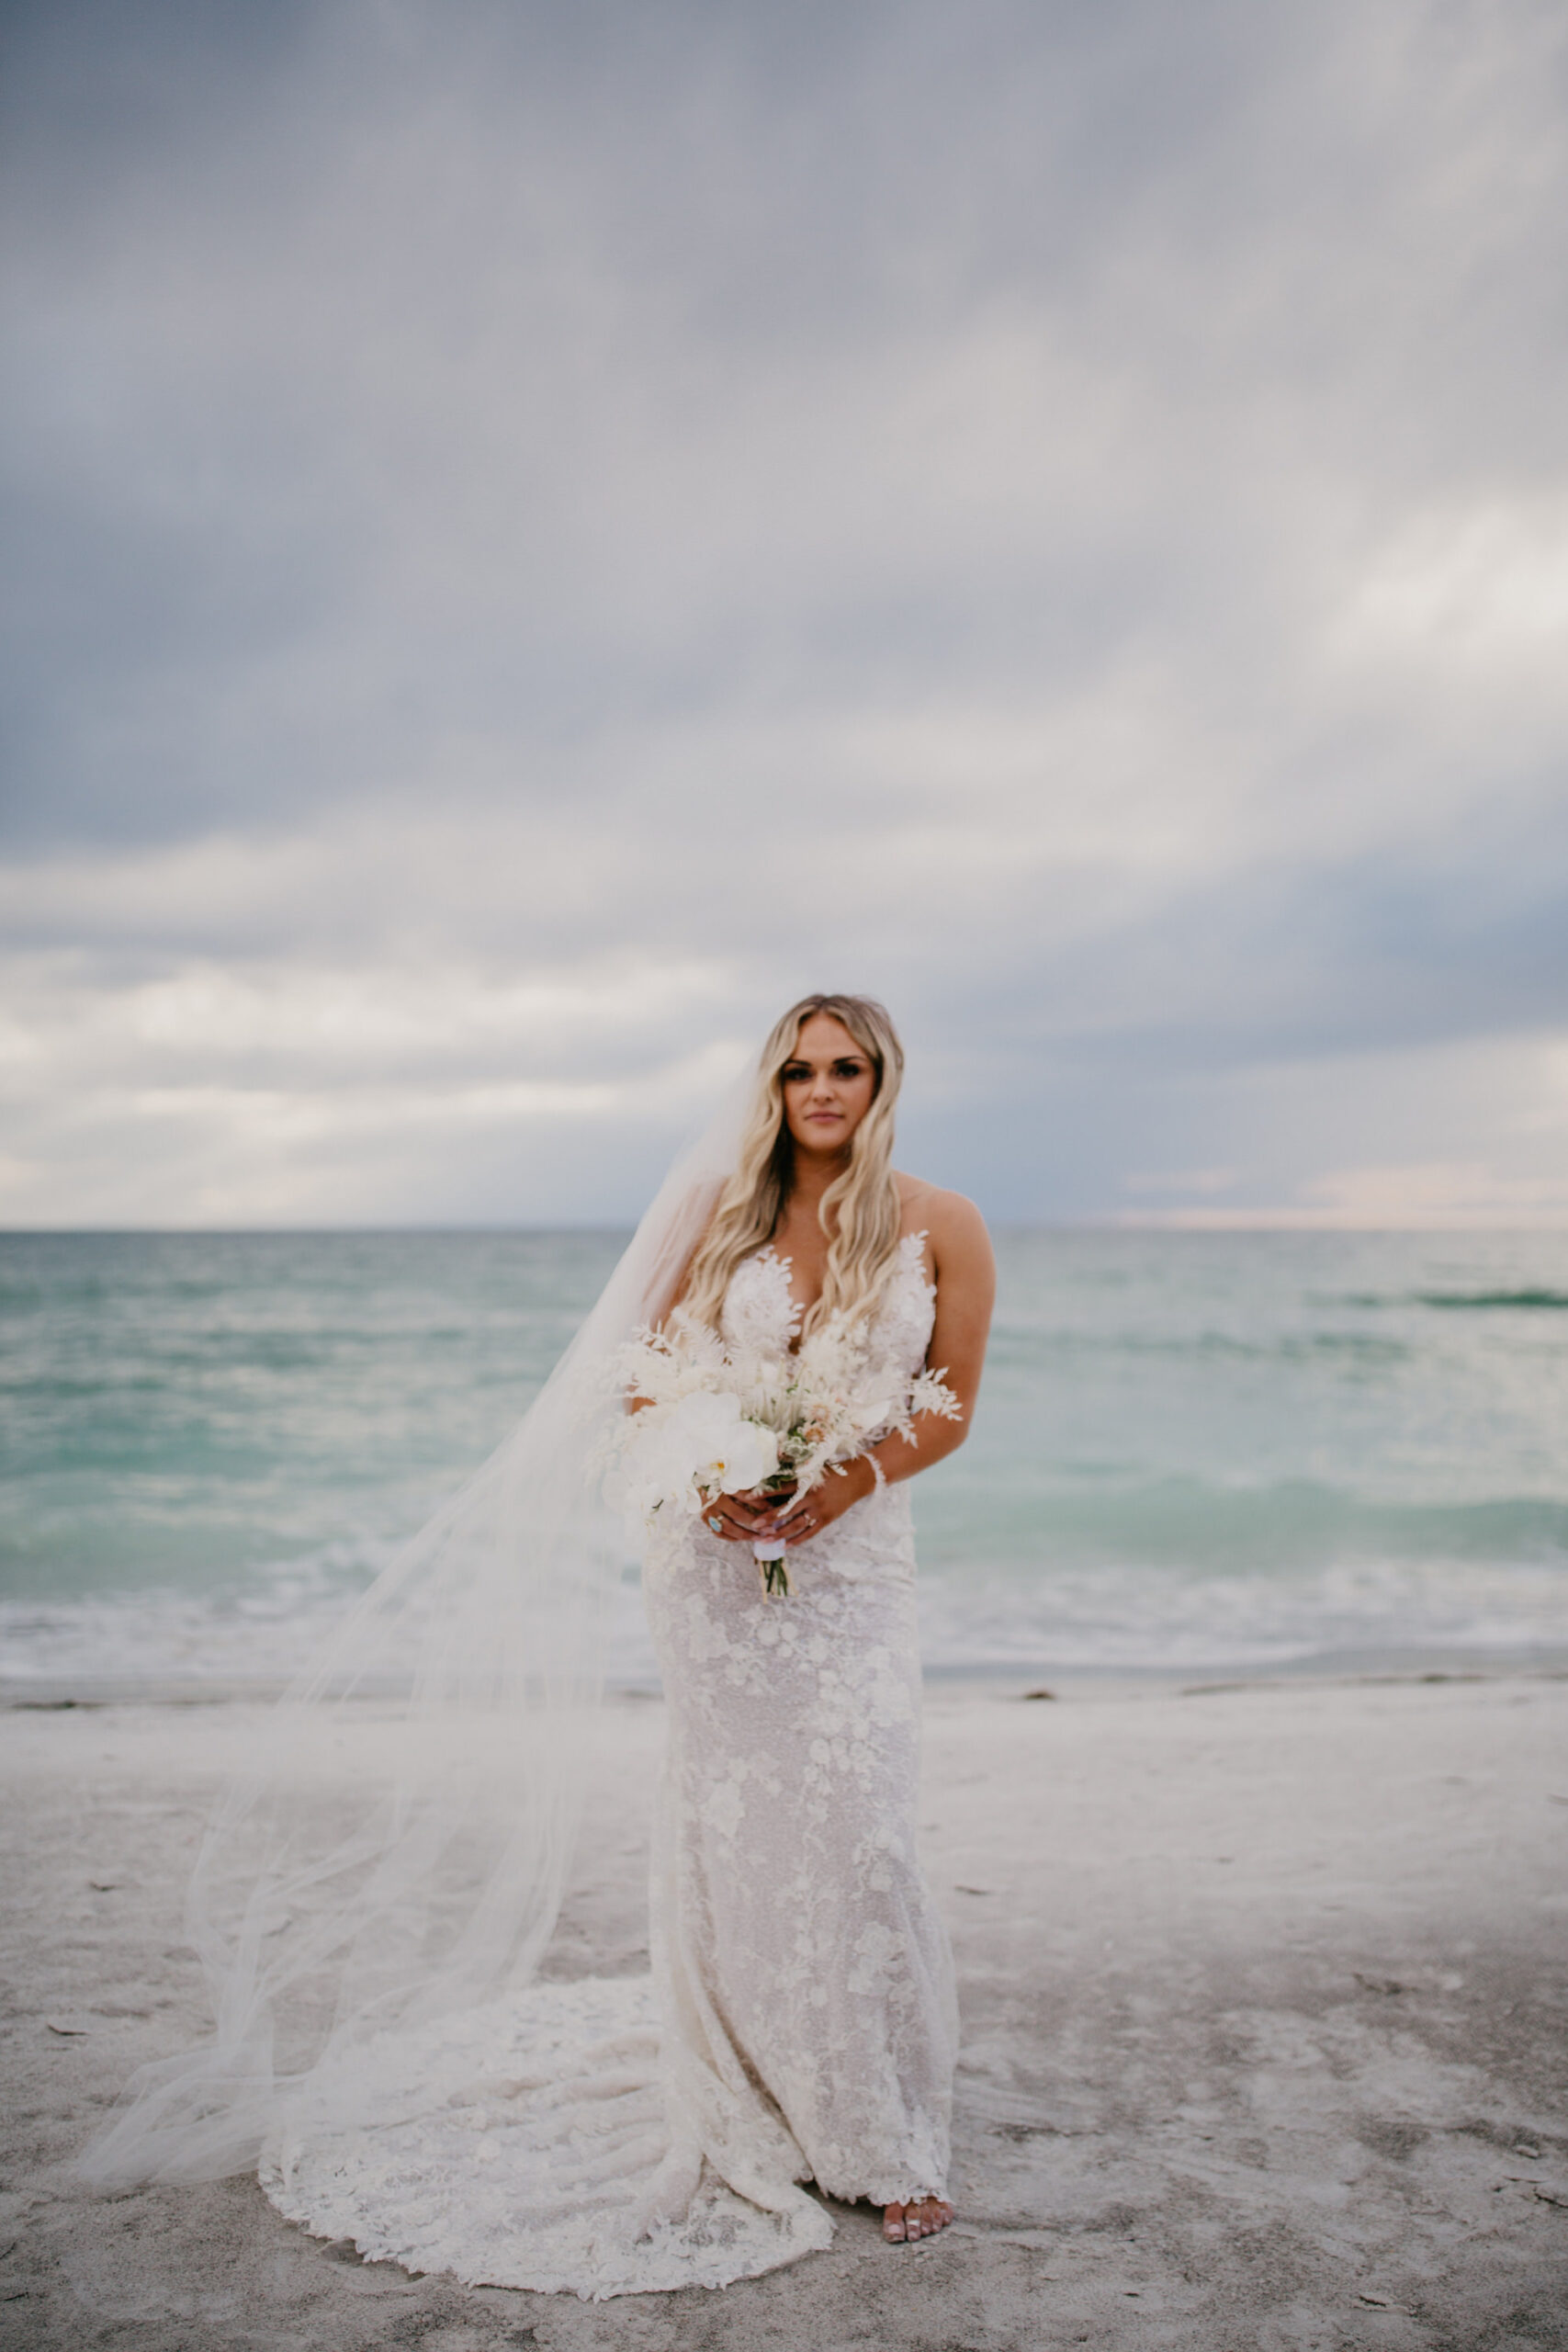 Ivory White Lace Backless Illusion Ines Di Santo Wedding Dress and Chapel Length Veil | Barefoot Beach Florida Bride